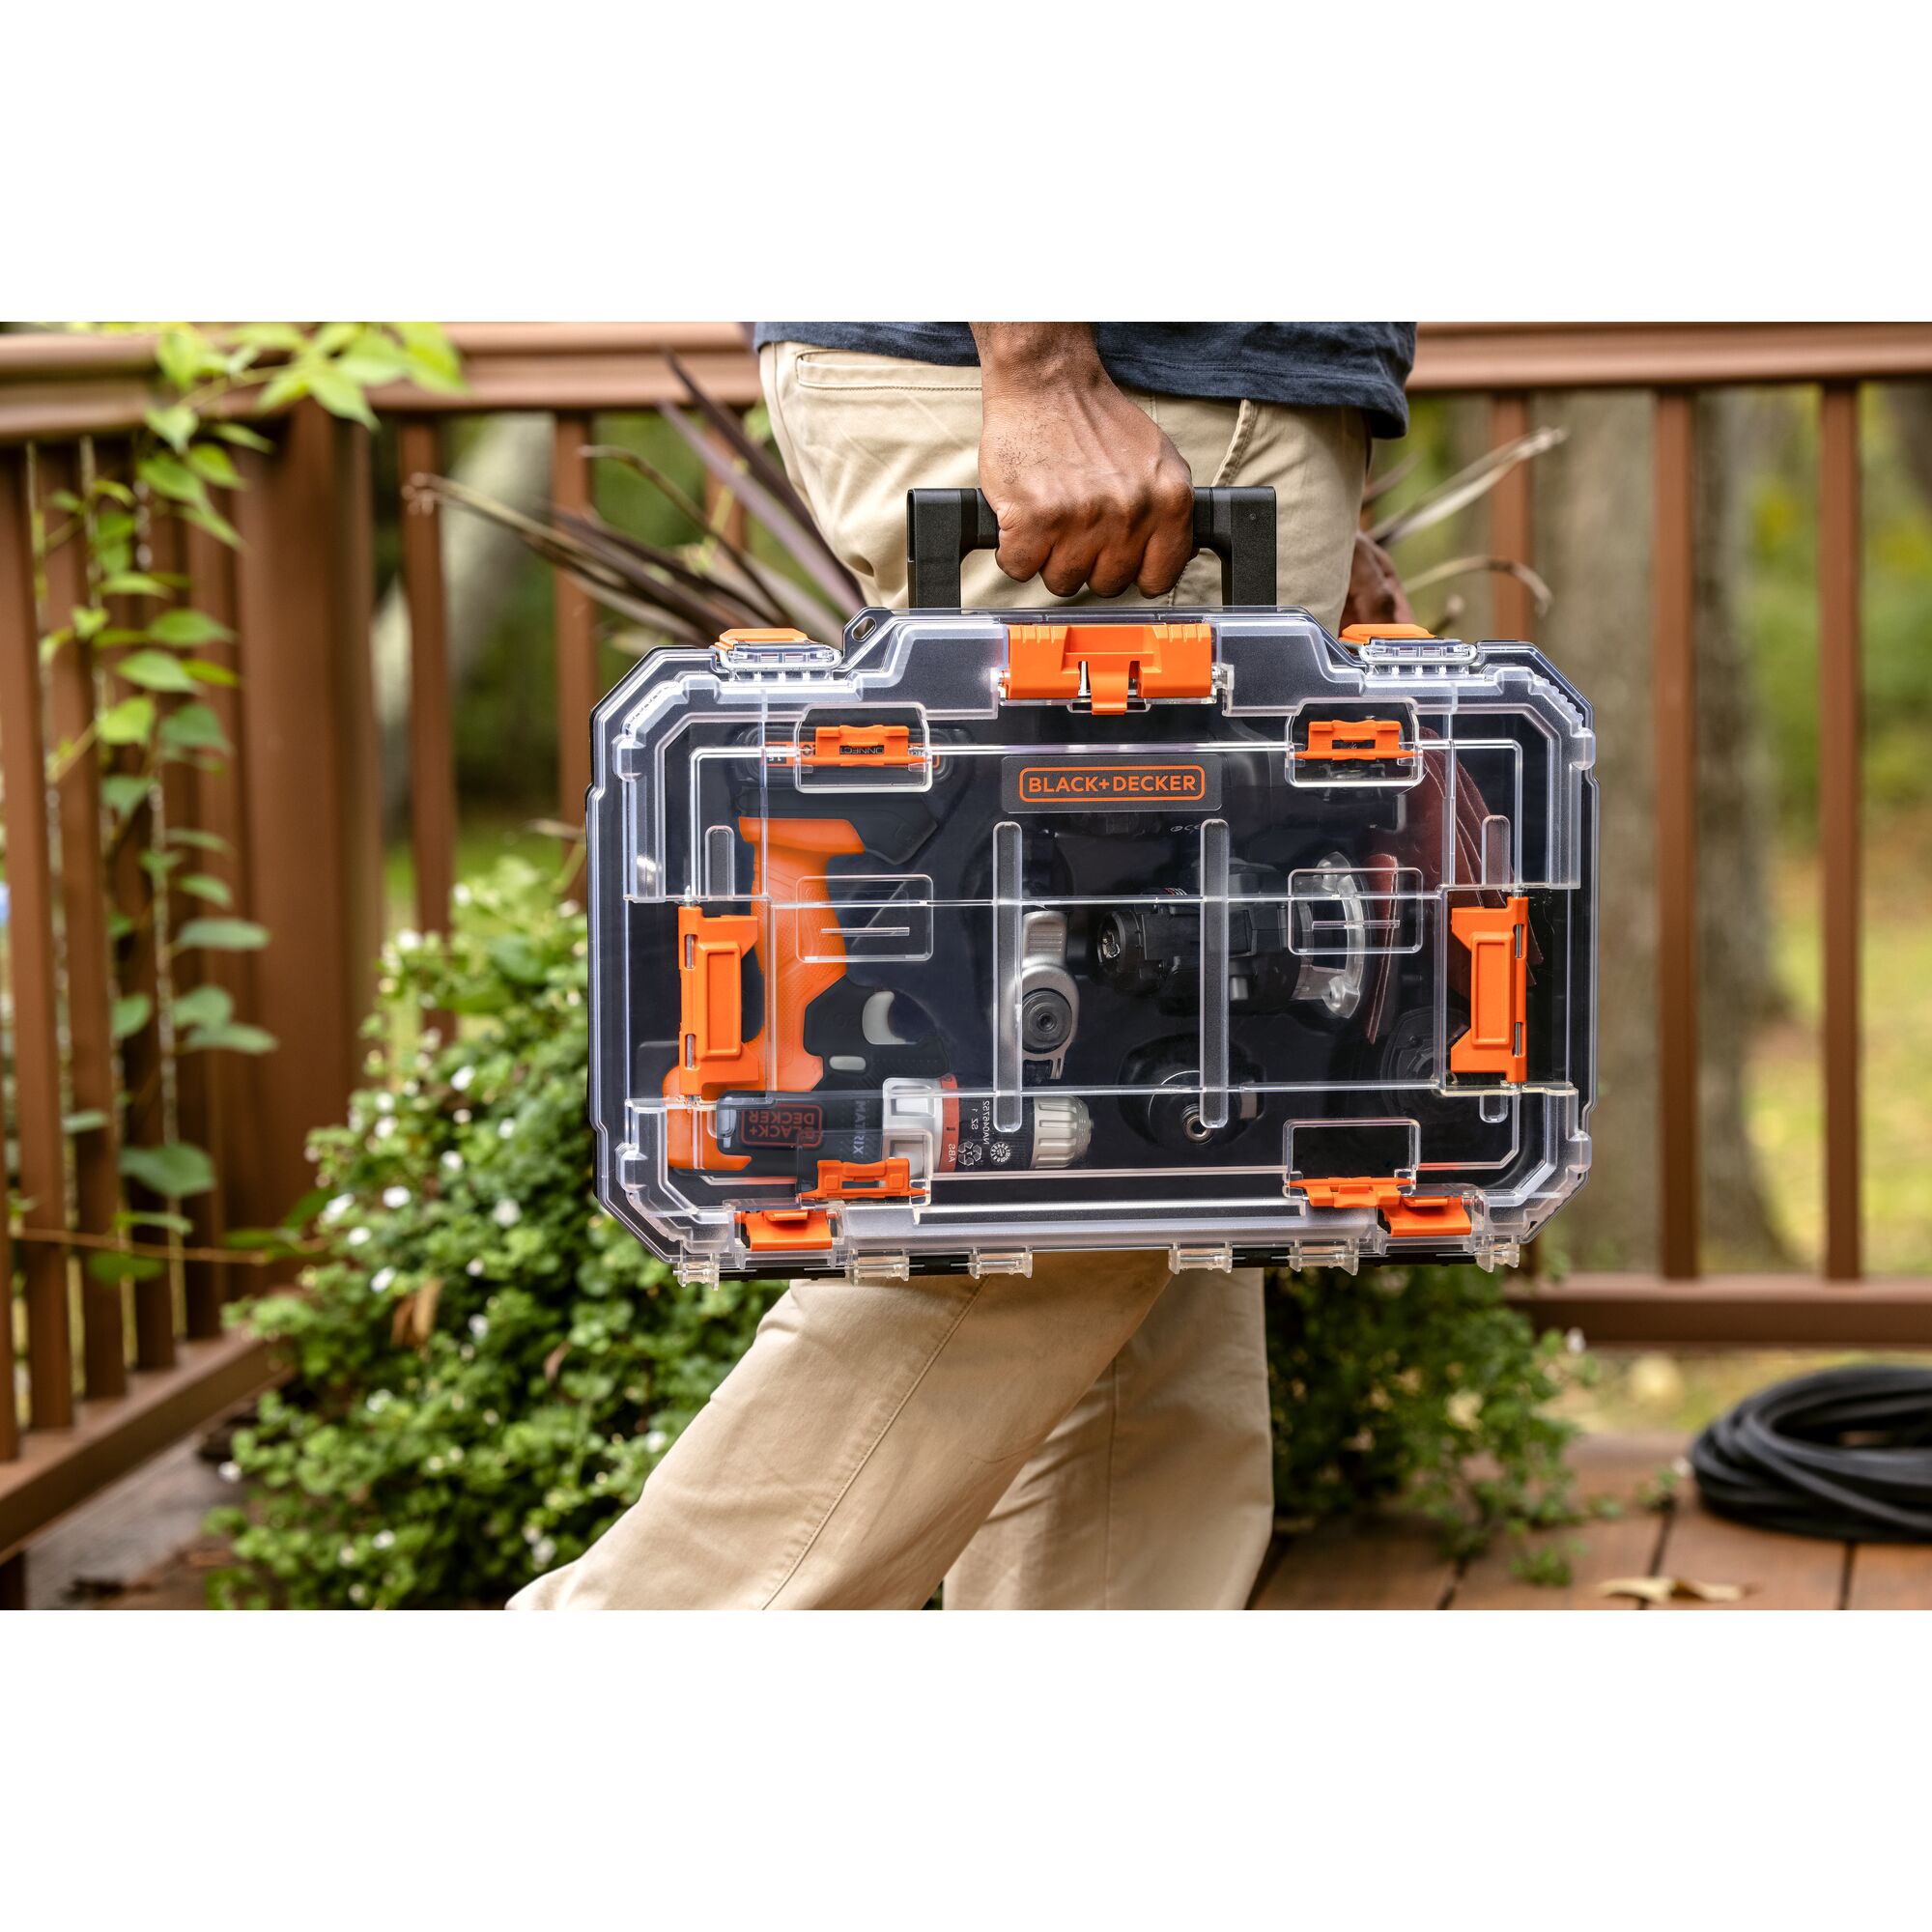 Person carrying black and decker 6 tool Cordless Drill Combo Kit with Case.